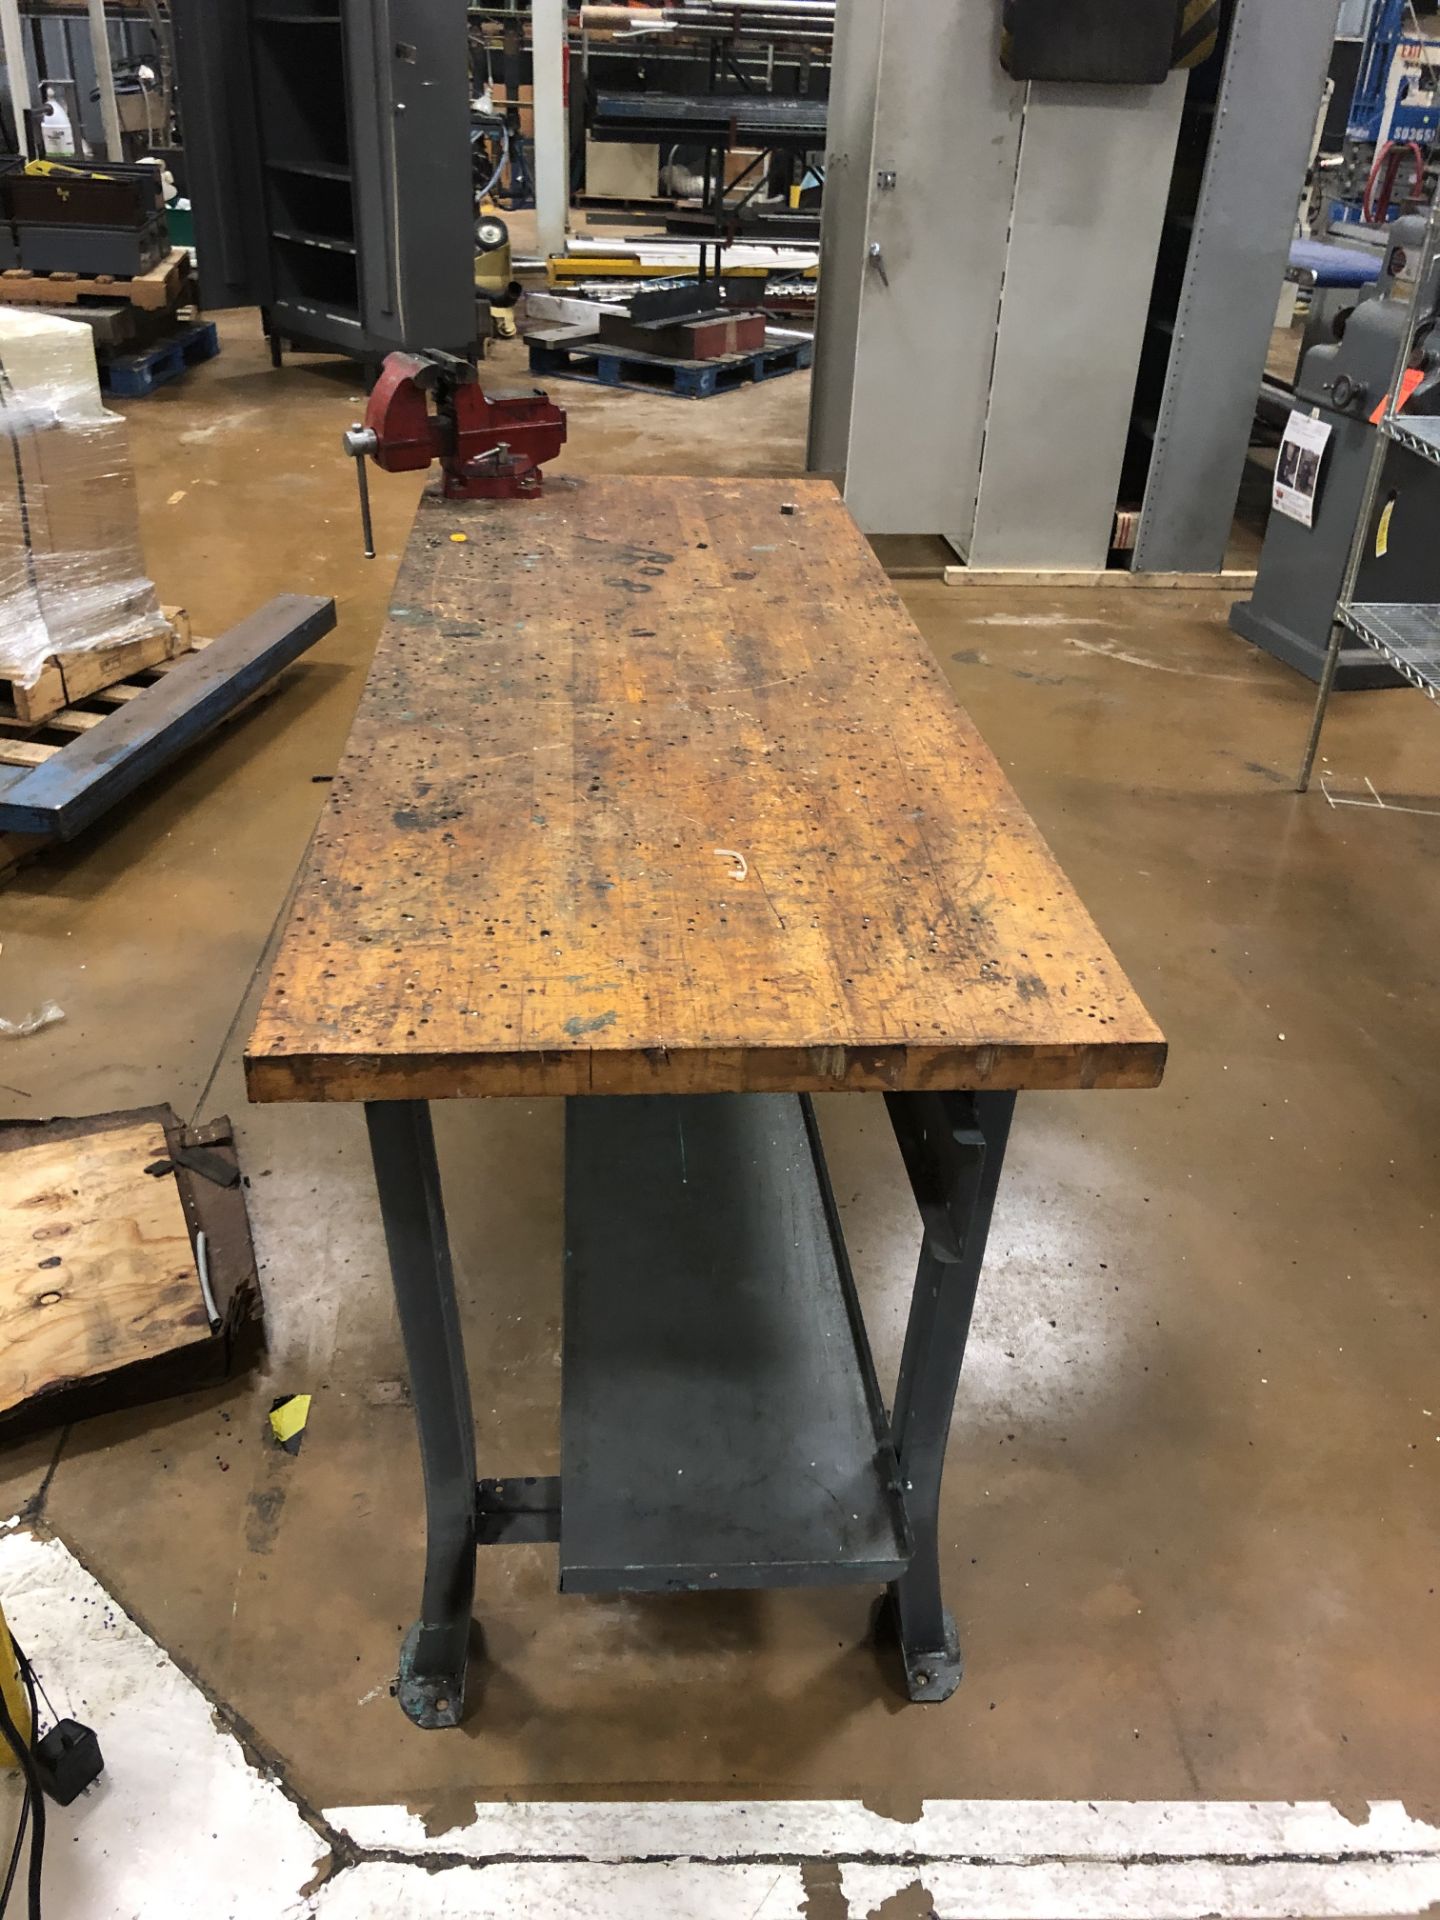 Metal Work Table with wooden top and Vice Attached